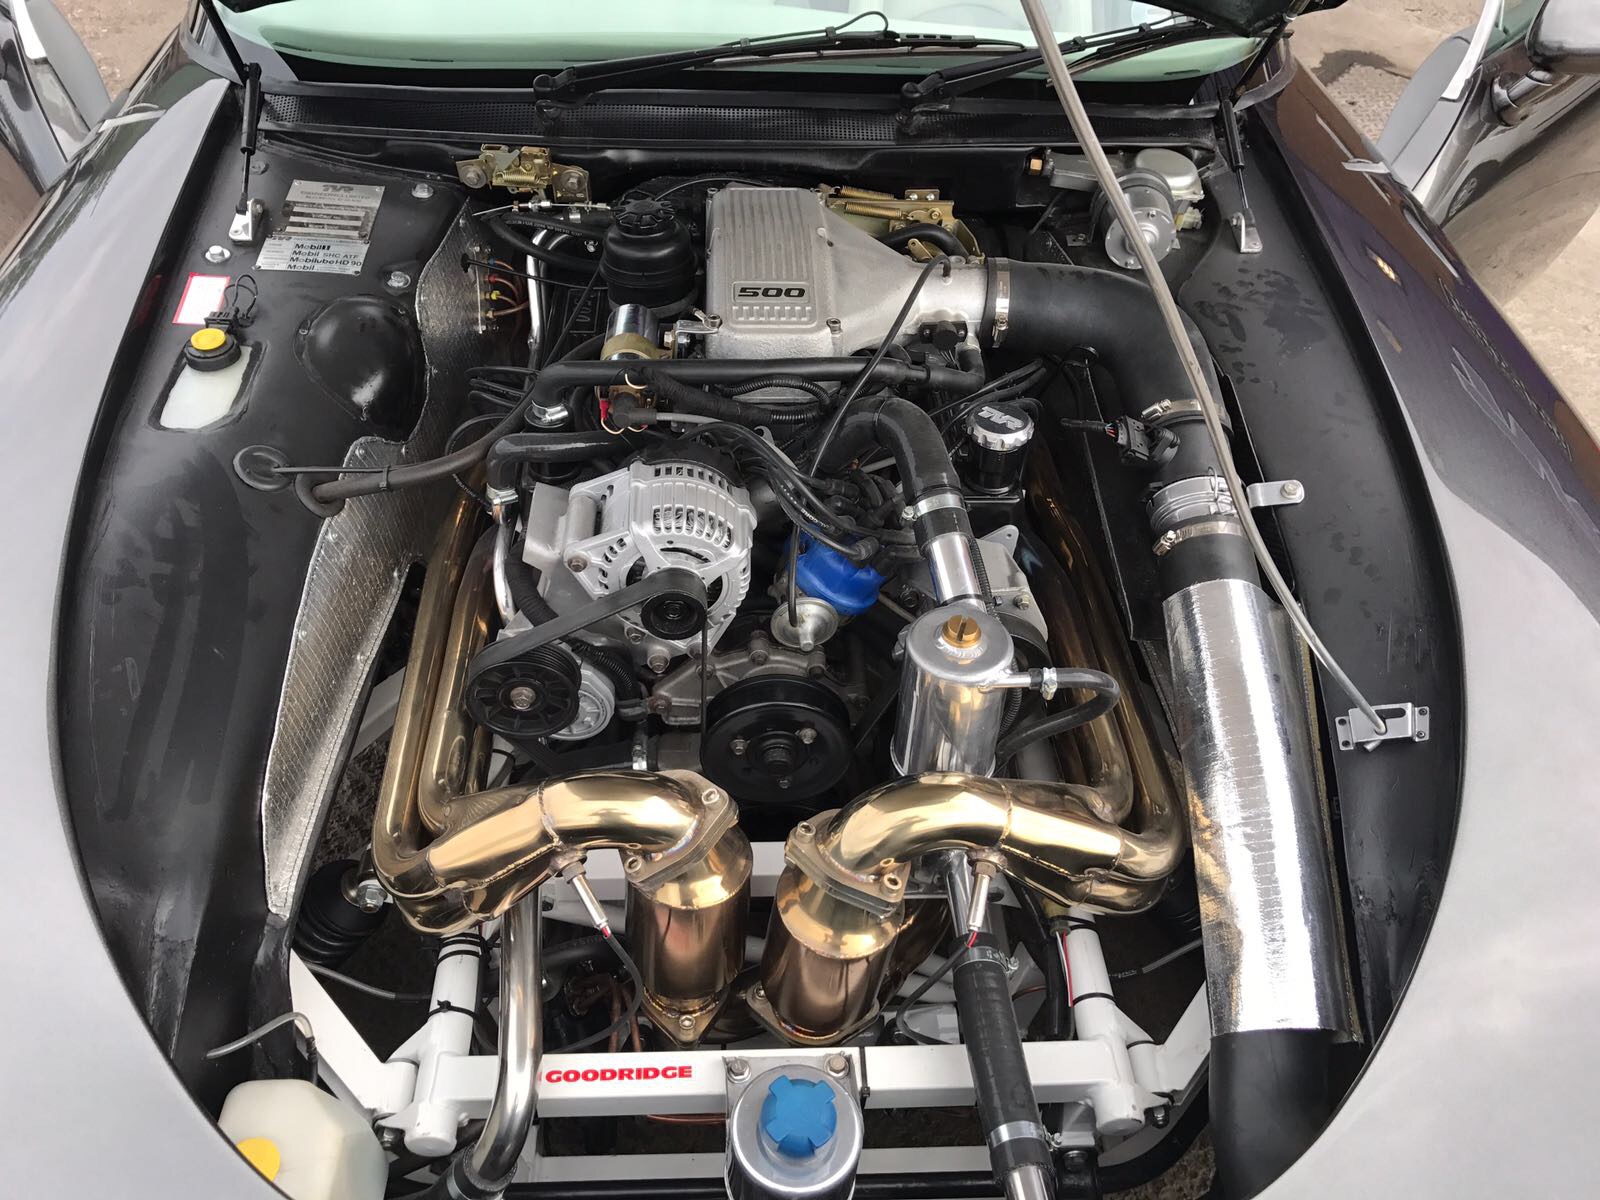 Engine Bay and Exhaust